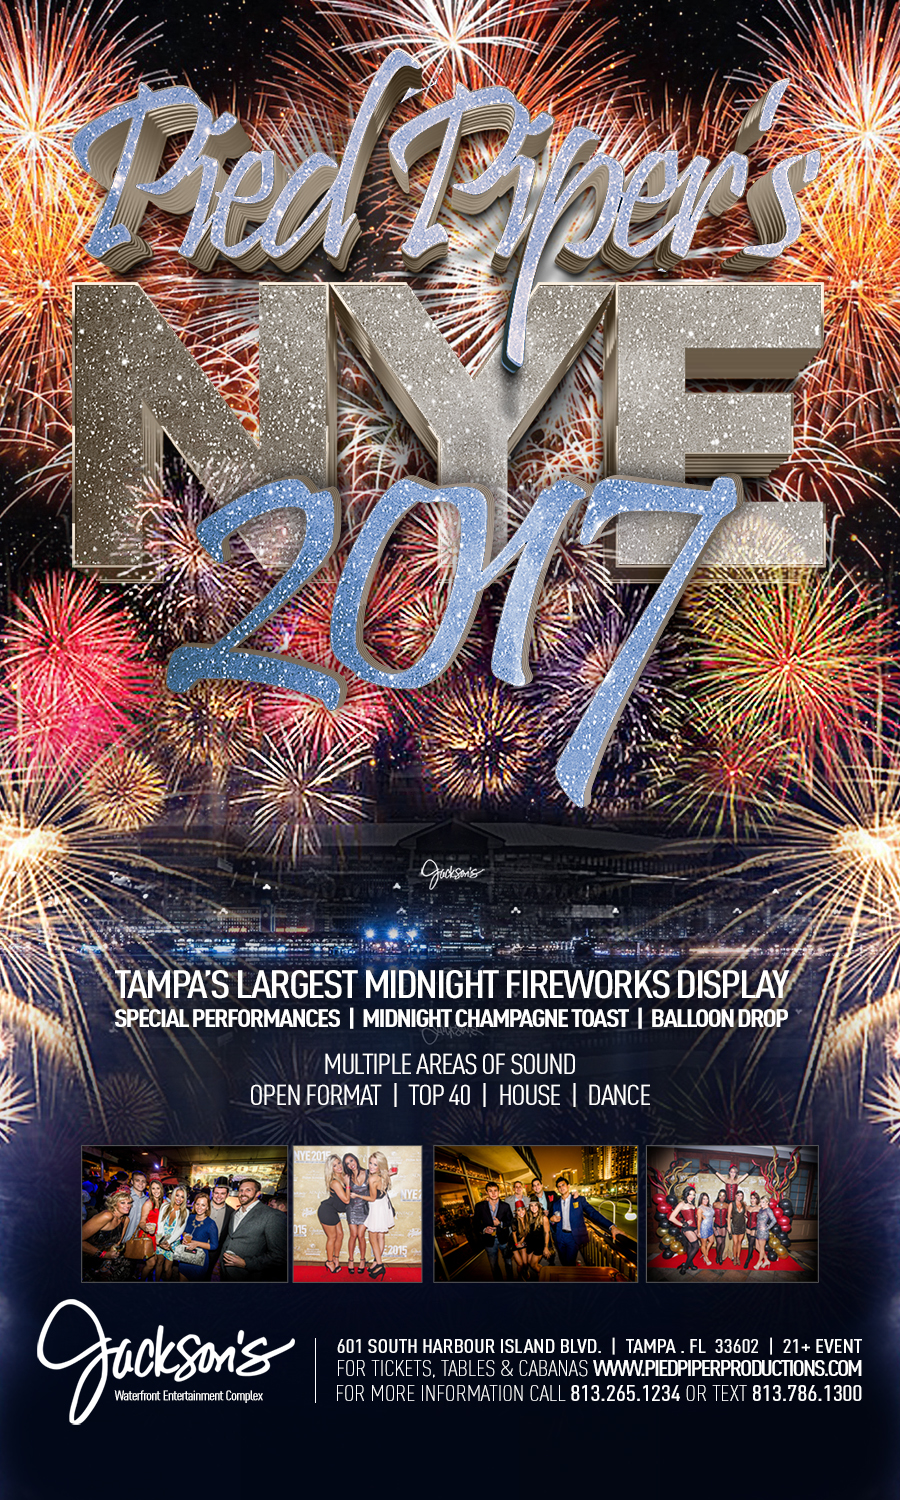 Tampa’s largest fireworks display, Jackson’s to host annual New Year’s bash